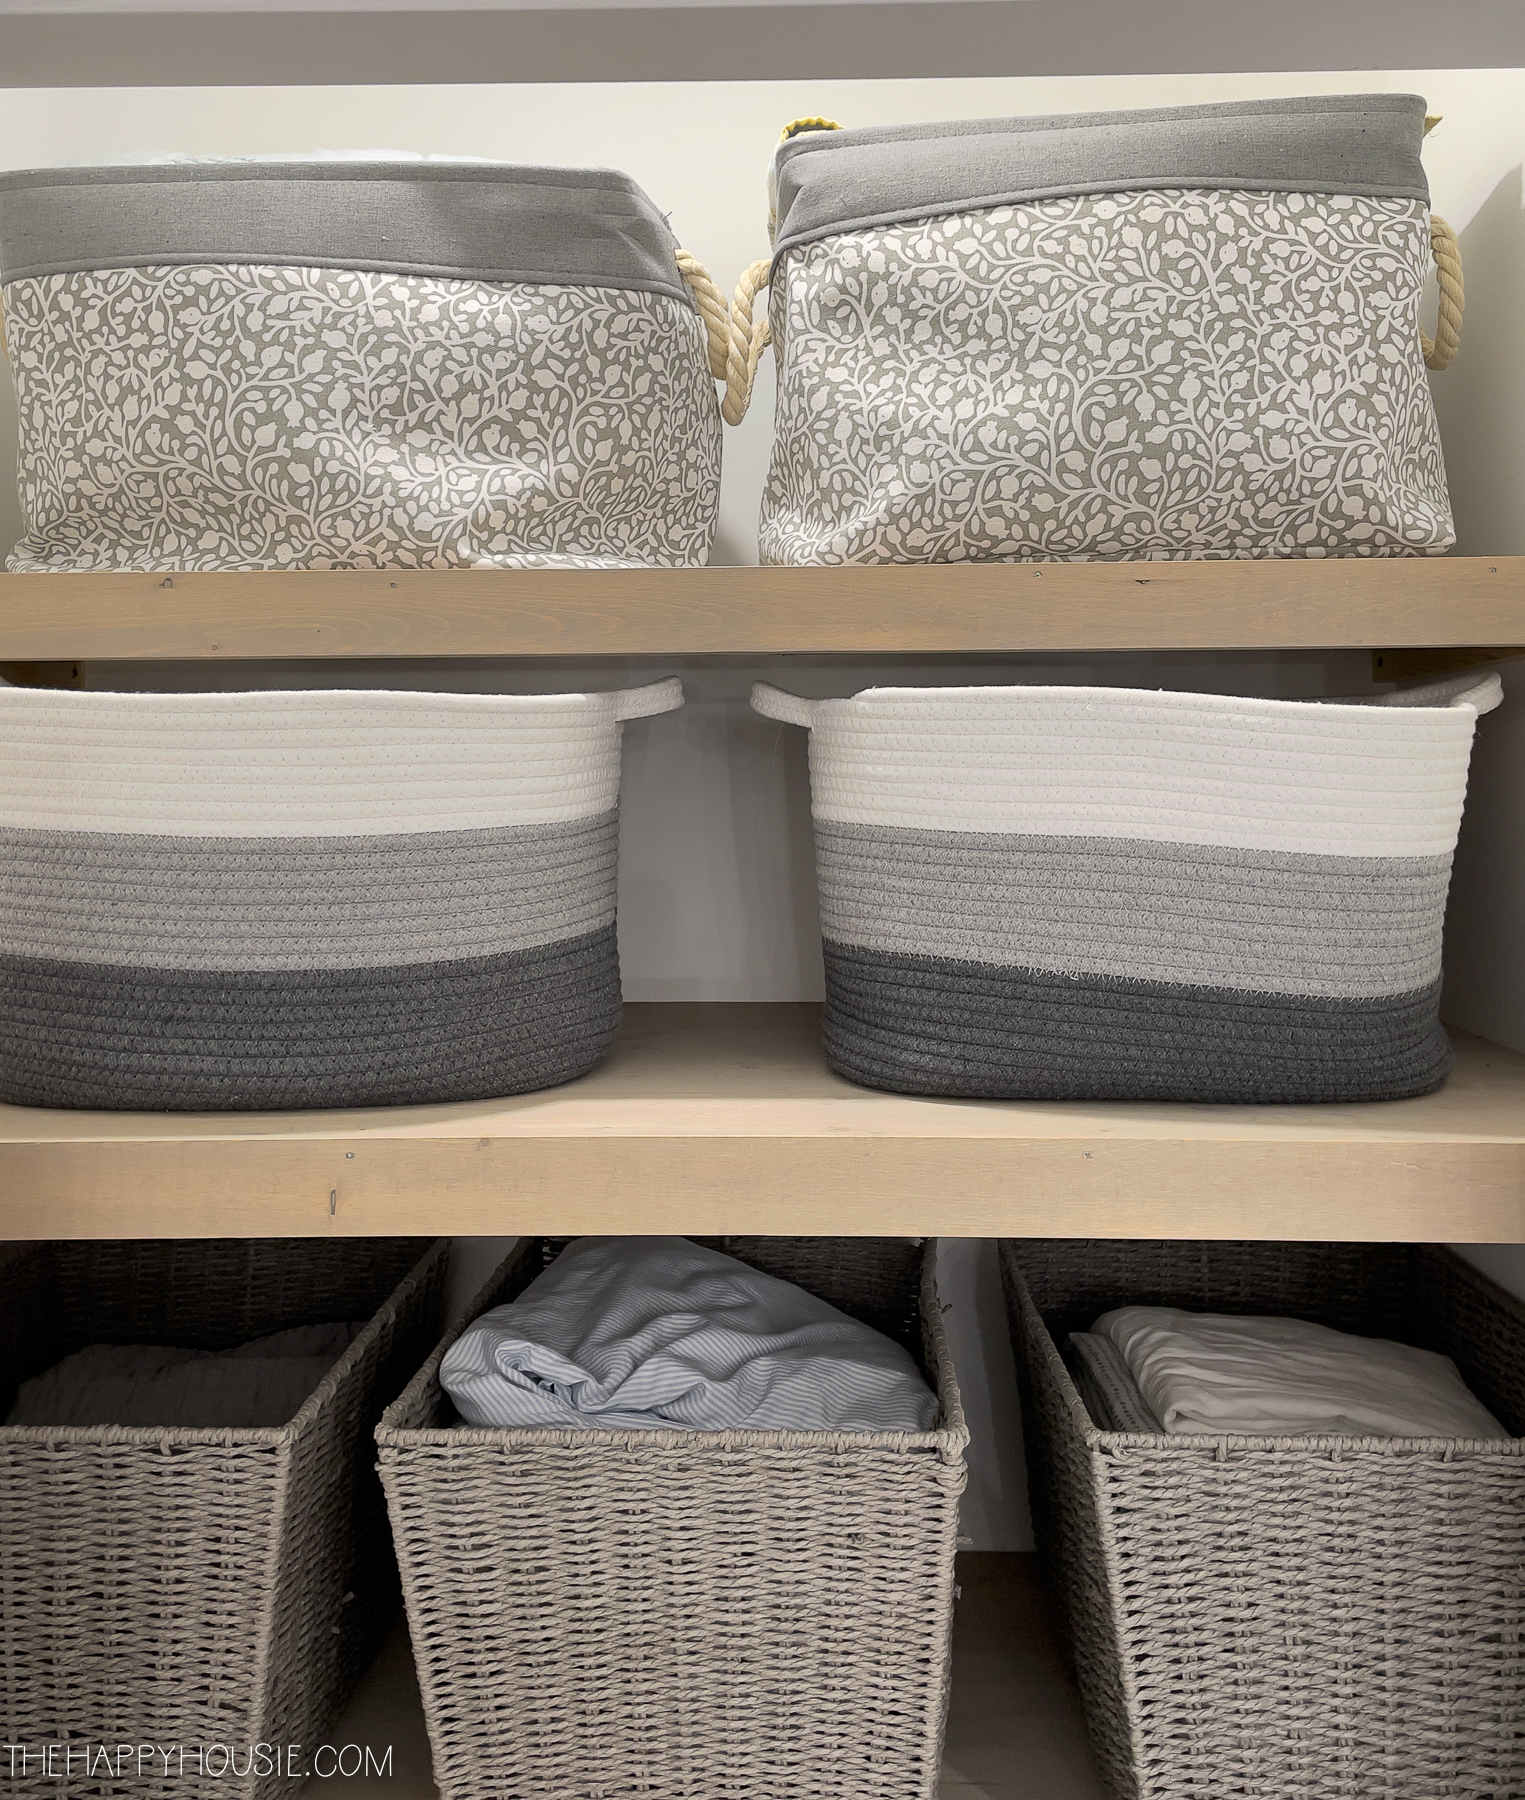 The shelves with the baskets and the linen inside.